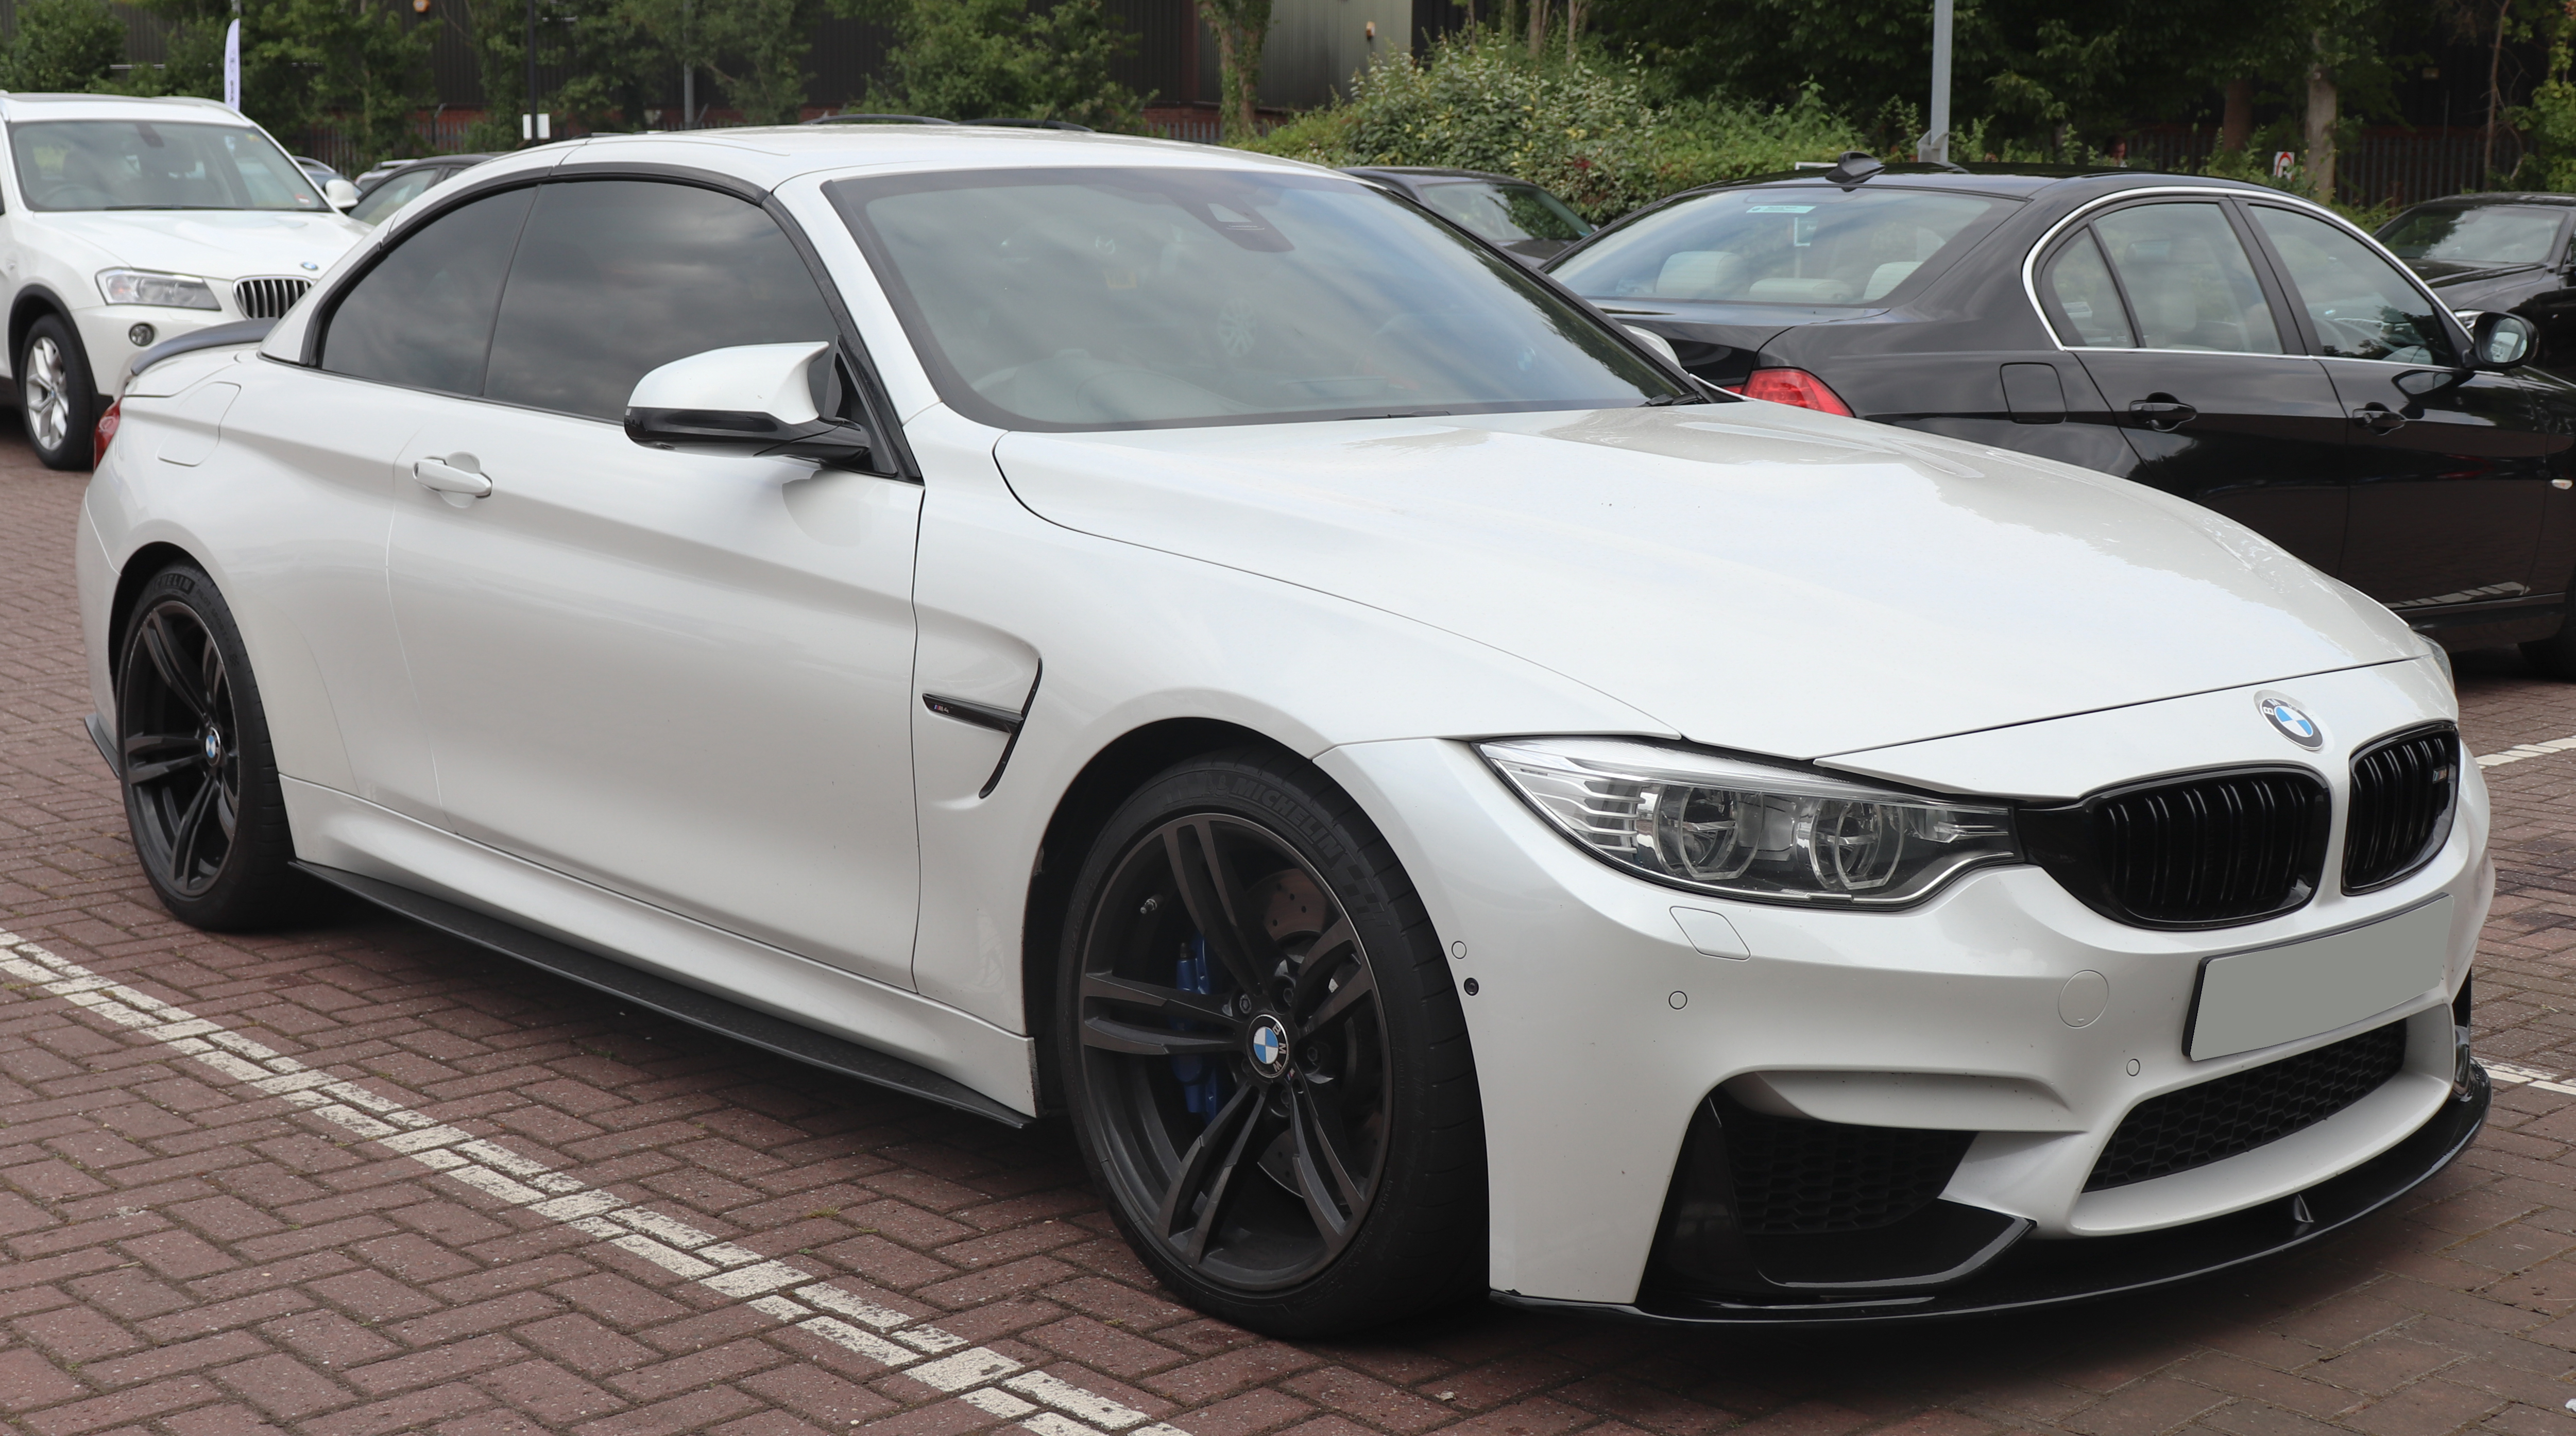 File:2014 BMW M4 3.0 Front.jpg - Wikimedia Commons